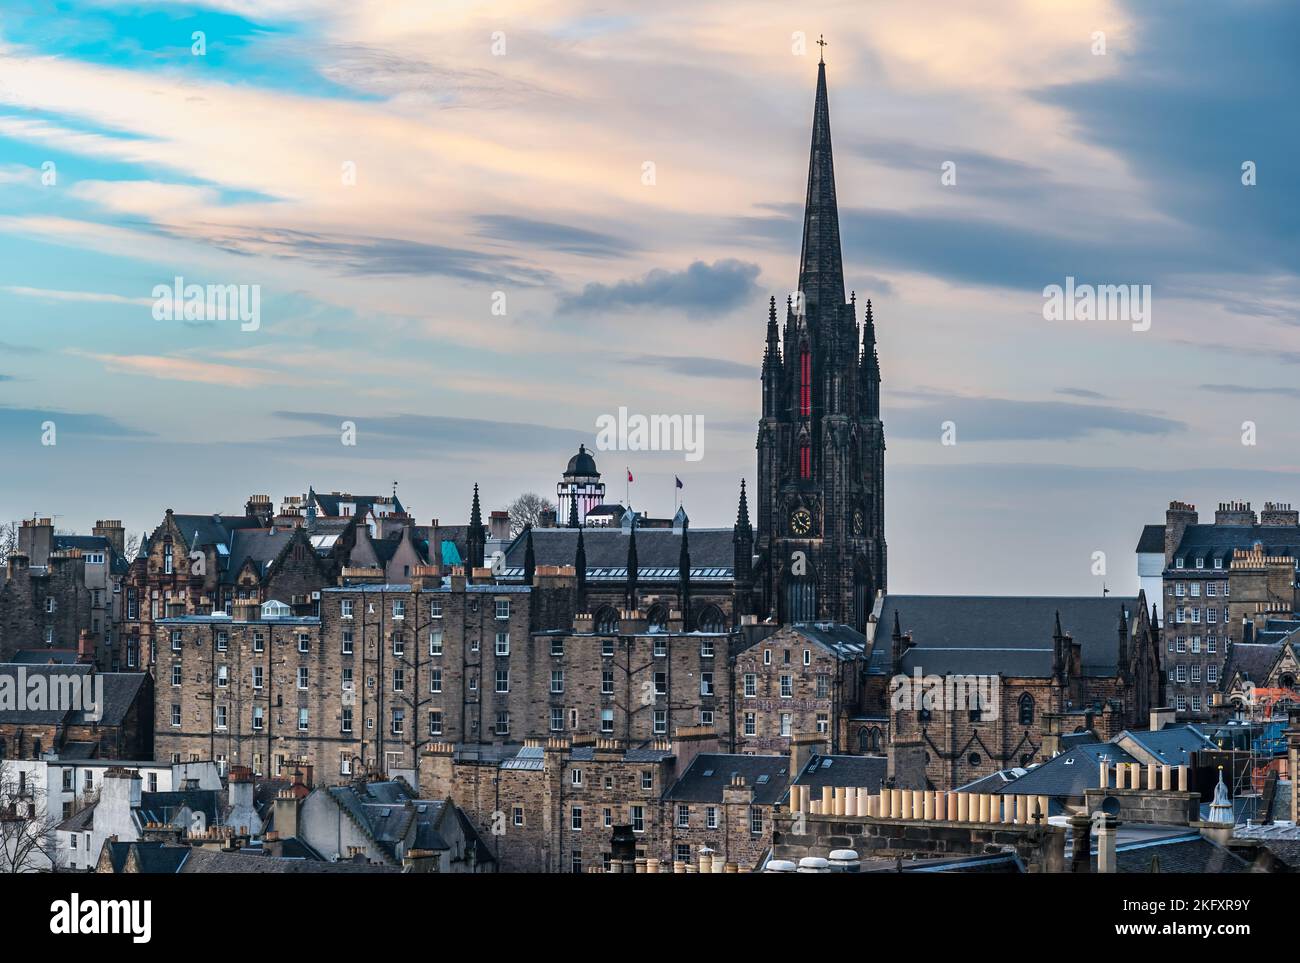 View over rooftops of Royal Mile historic buildings with The Hub spire at dusk, Edinburgh, Scotland, UK Stock Photo